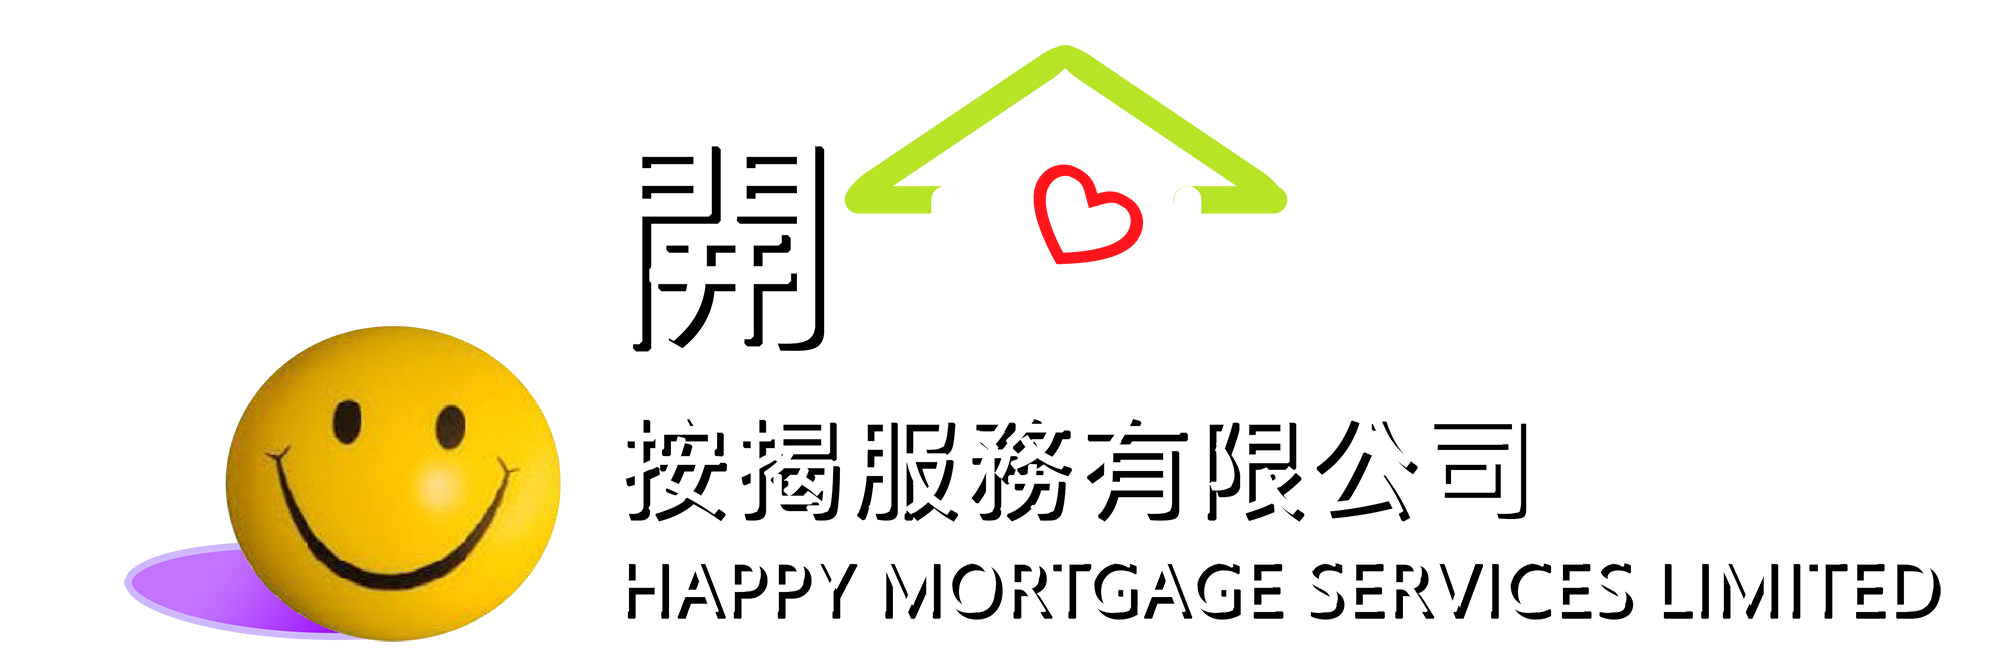 Happy Mortgage Services Limited Logo